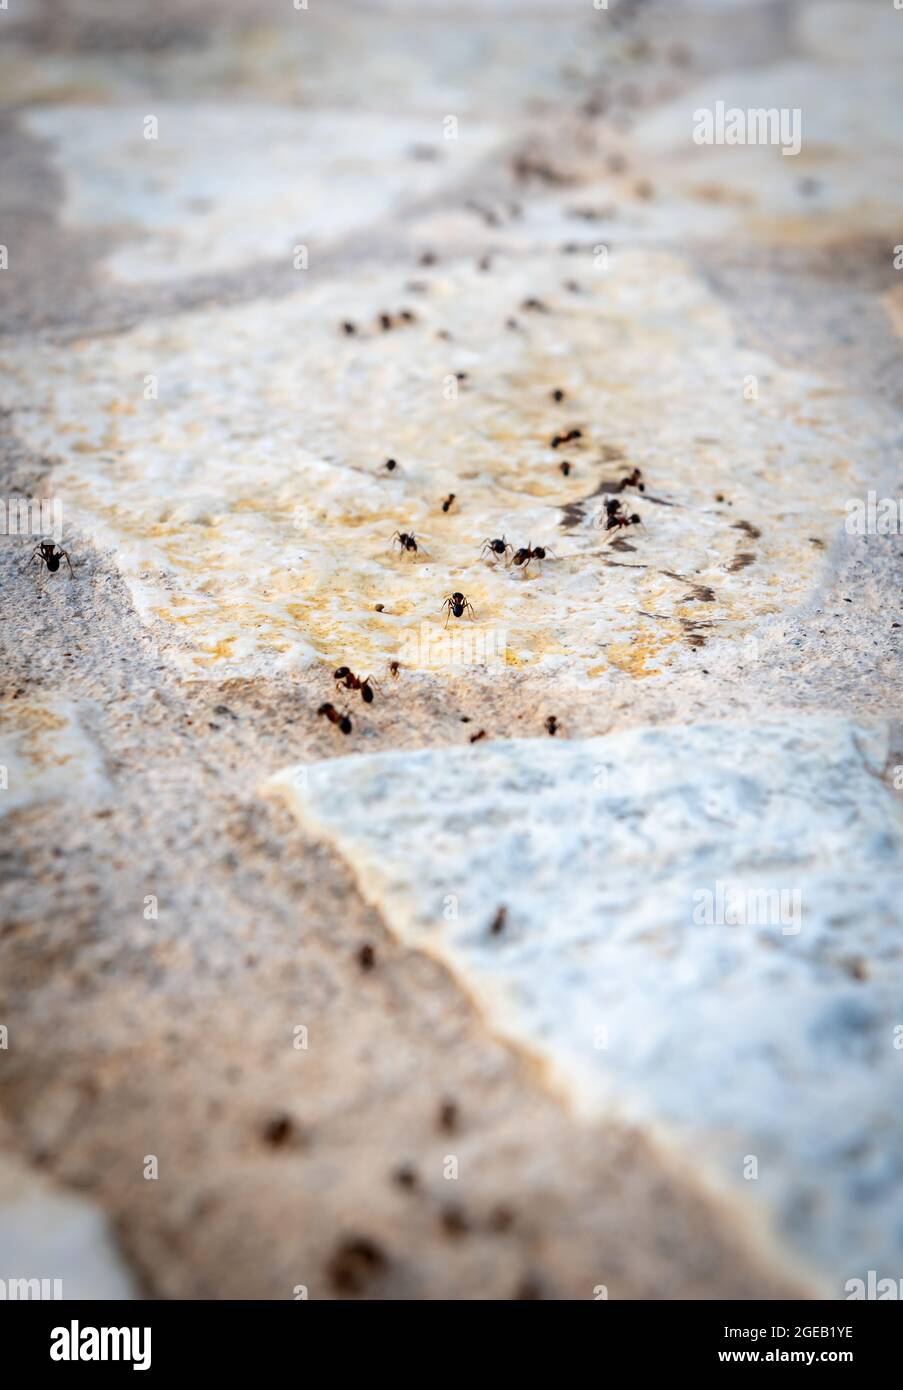 A colony of ants marching in a line. Stock Photo